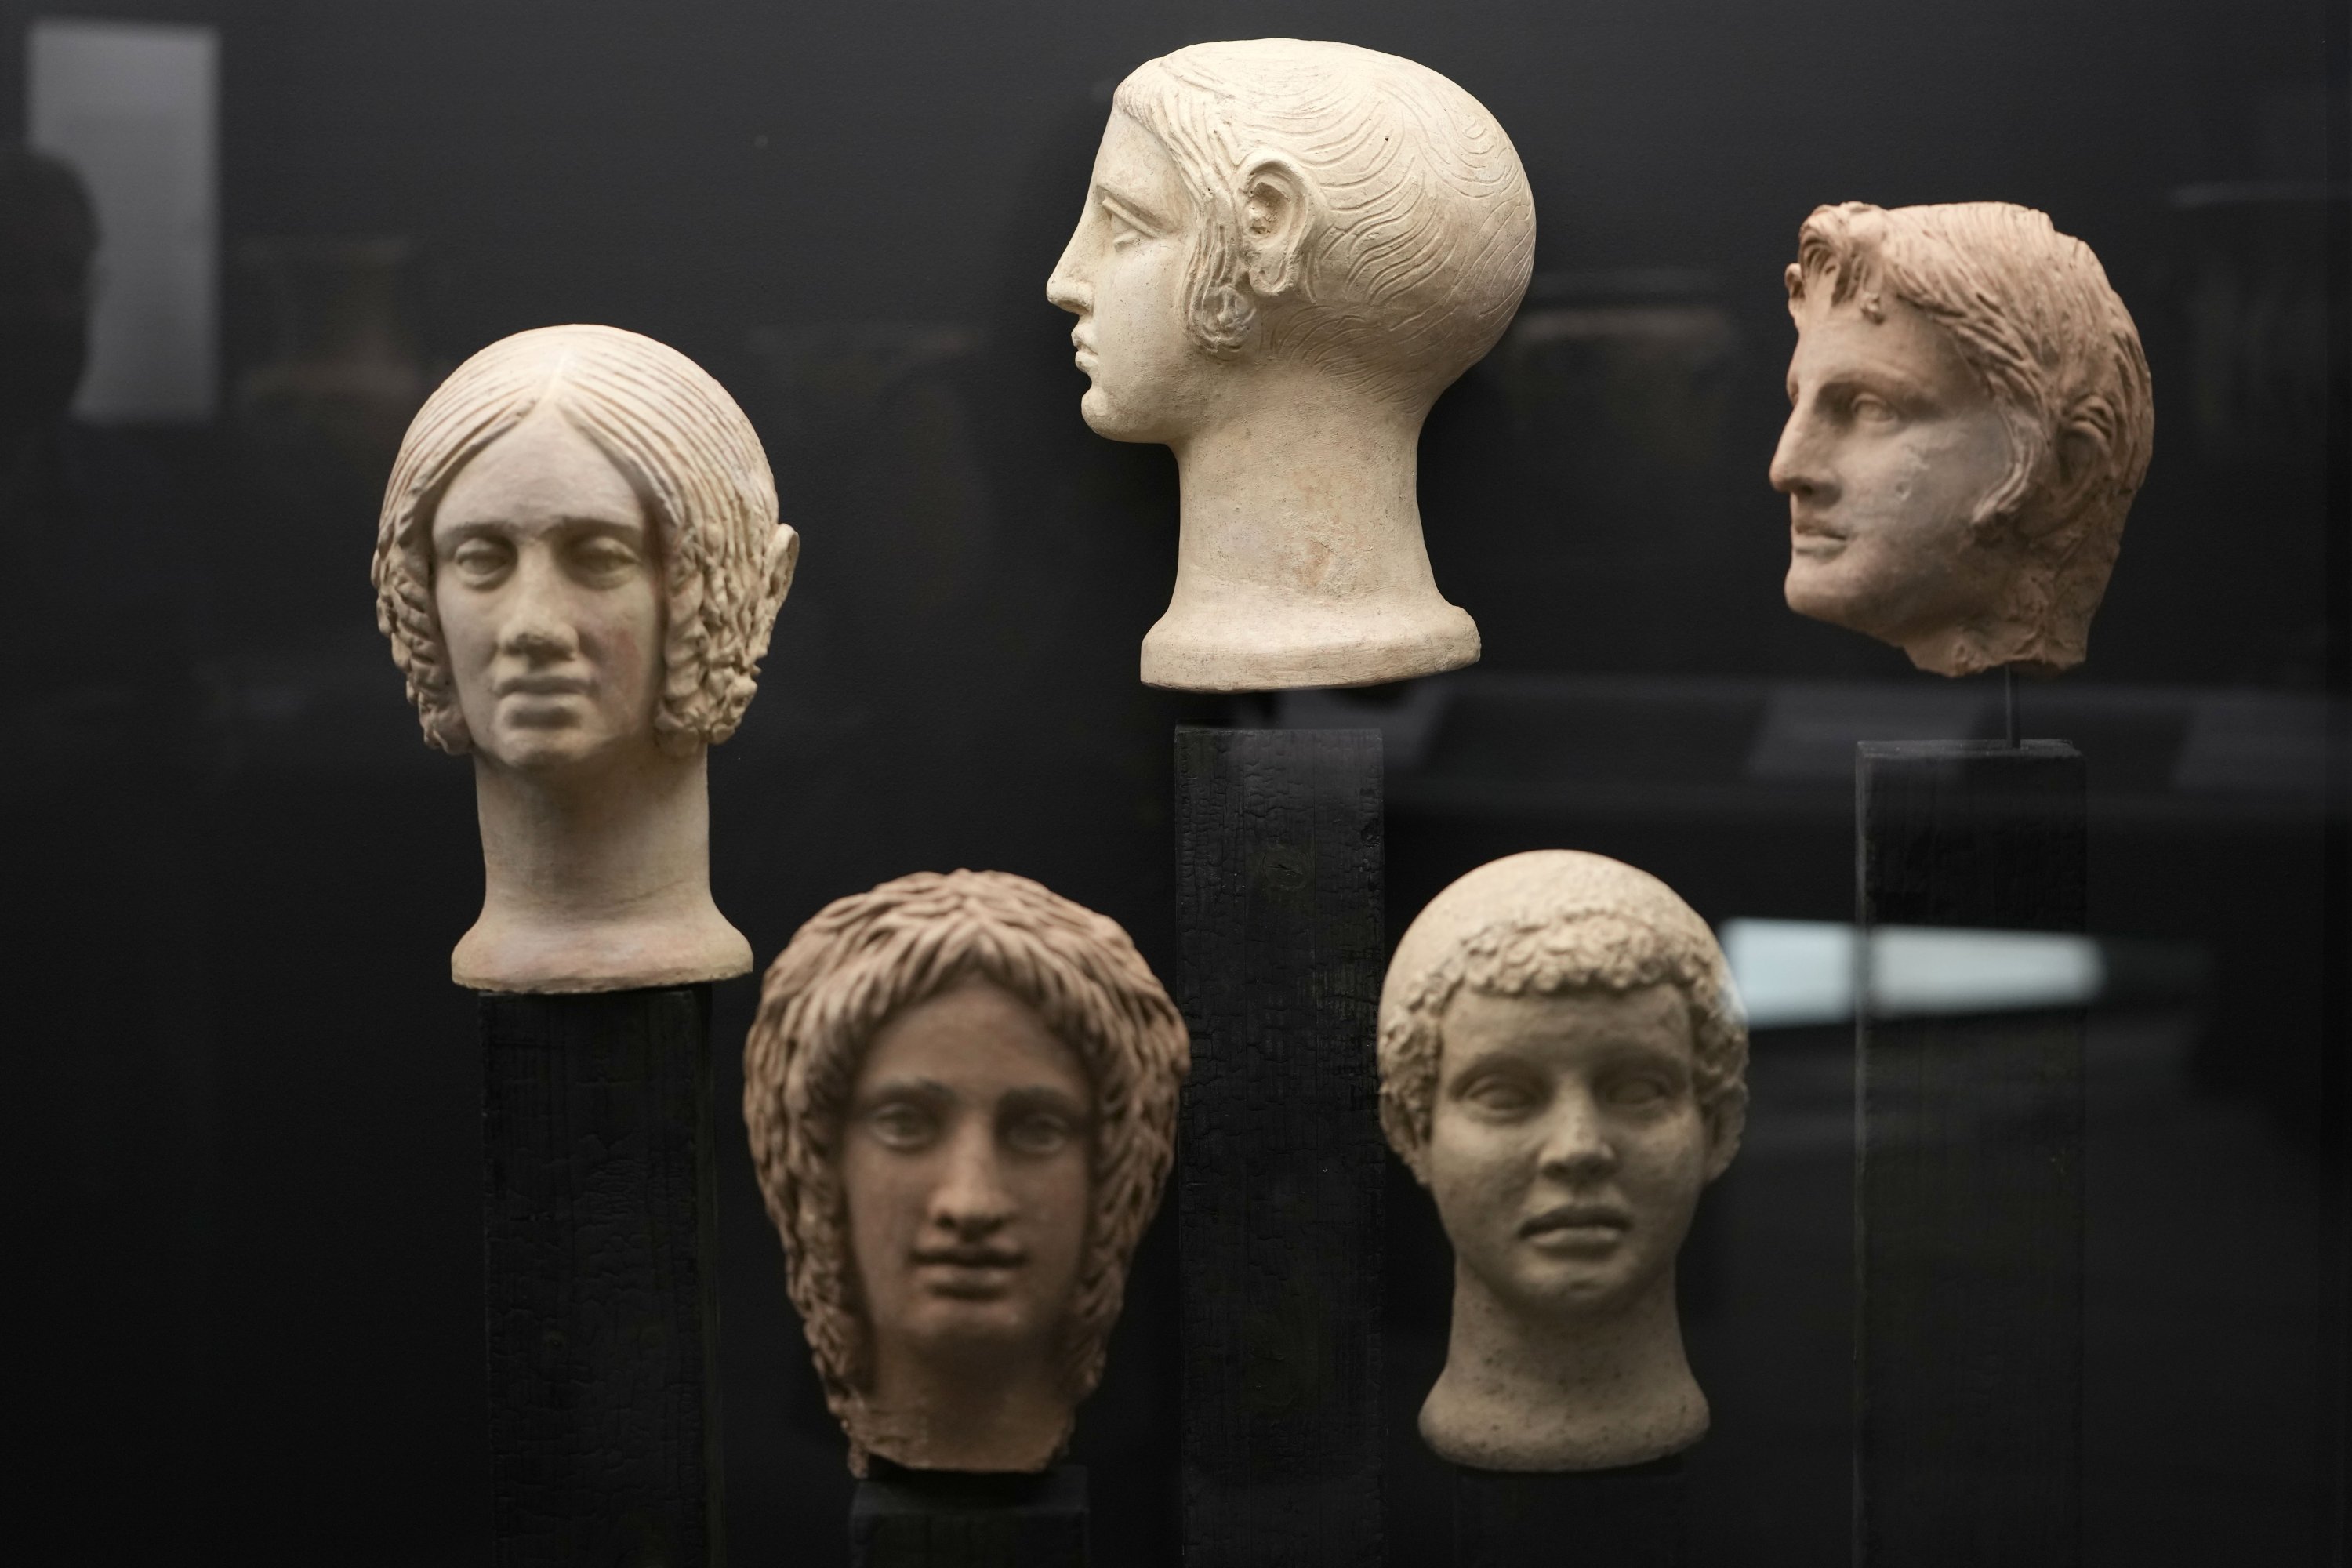 Votive terracotta heads and half-heads from the third and fourth centuries B.C. are displayed in the new "Museum of Rescued Art" in Rome, Italy, Wednesday, June 15, 2022. (AP)